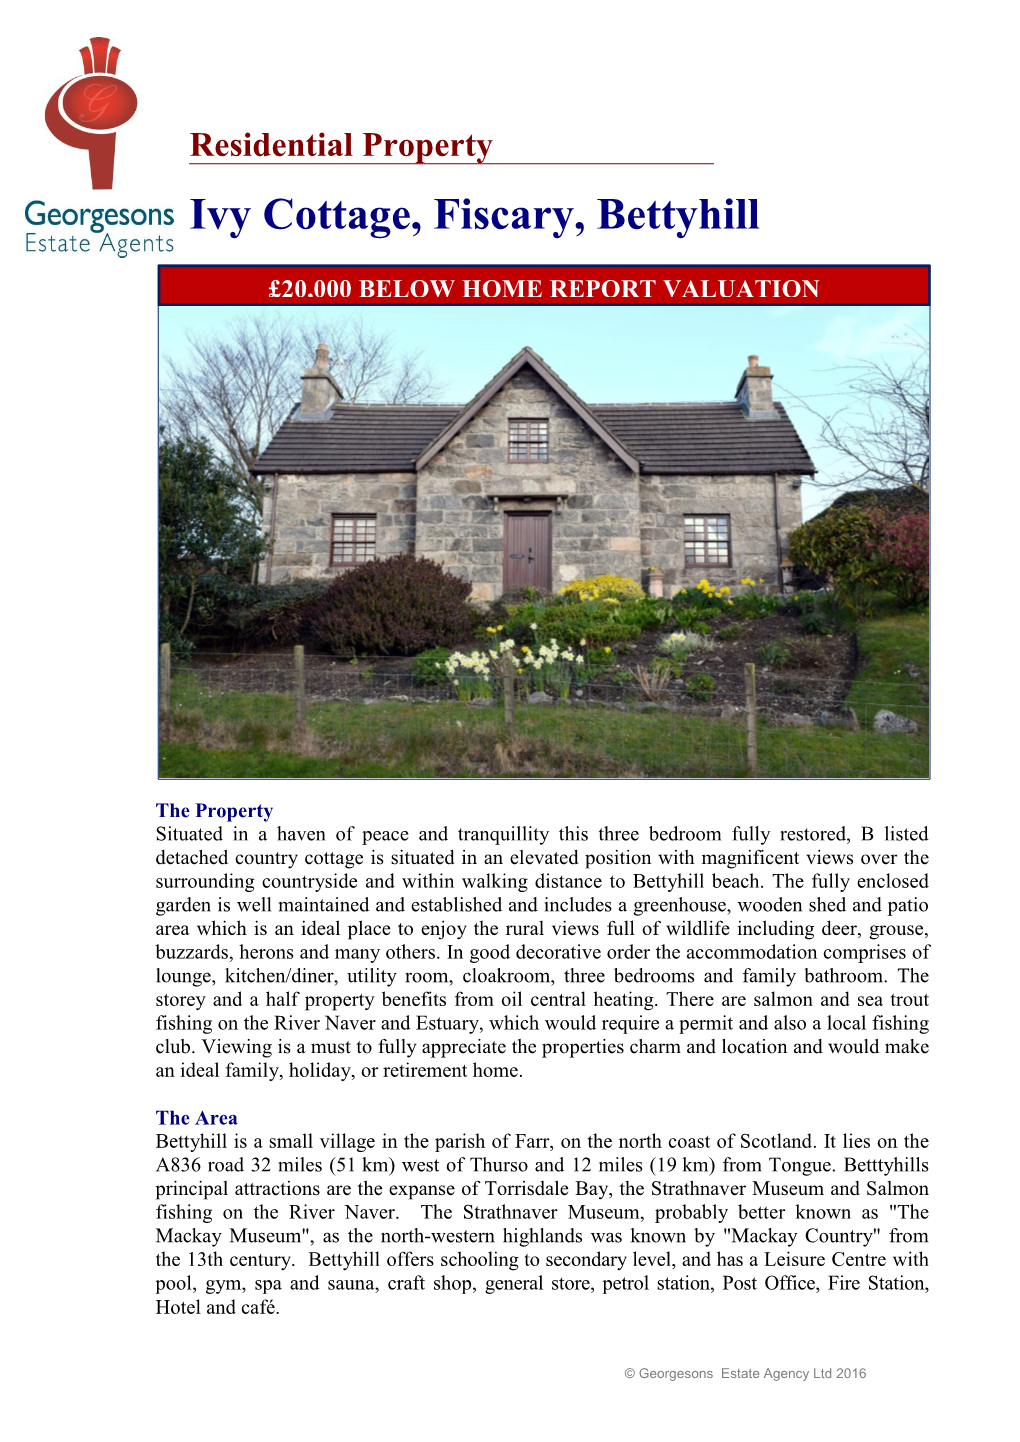 Residential Property Ivy Cottage, Fiscary, Bettyhill